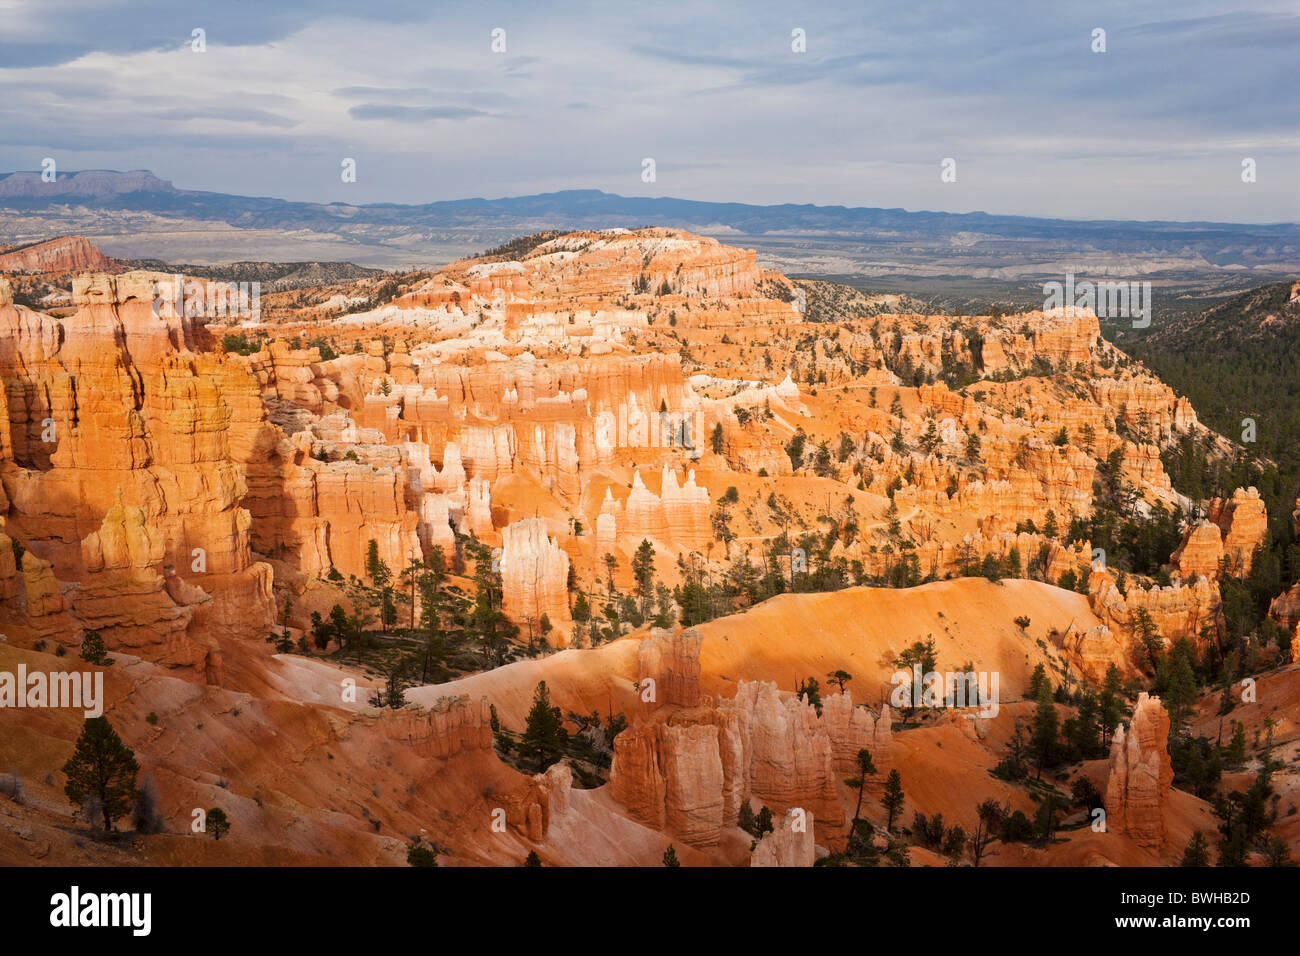 Rocky landscape with hoodoos, Bryce Canyon National Park, Utah, USA Stock Photo